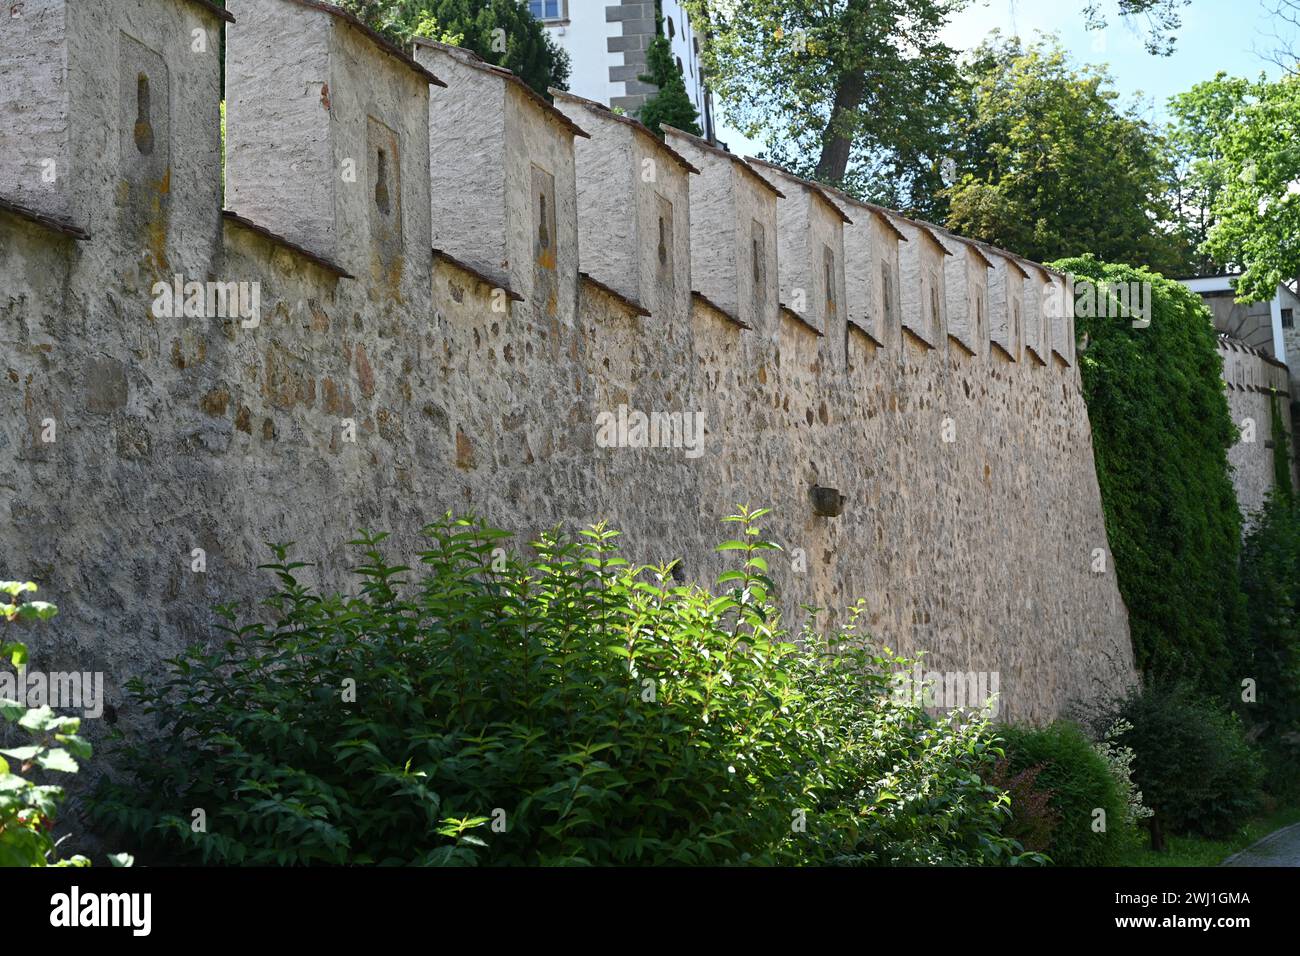 Town fortification of Weitra, Austria Stock Photo